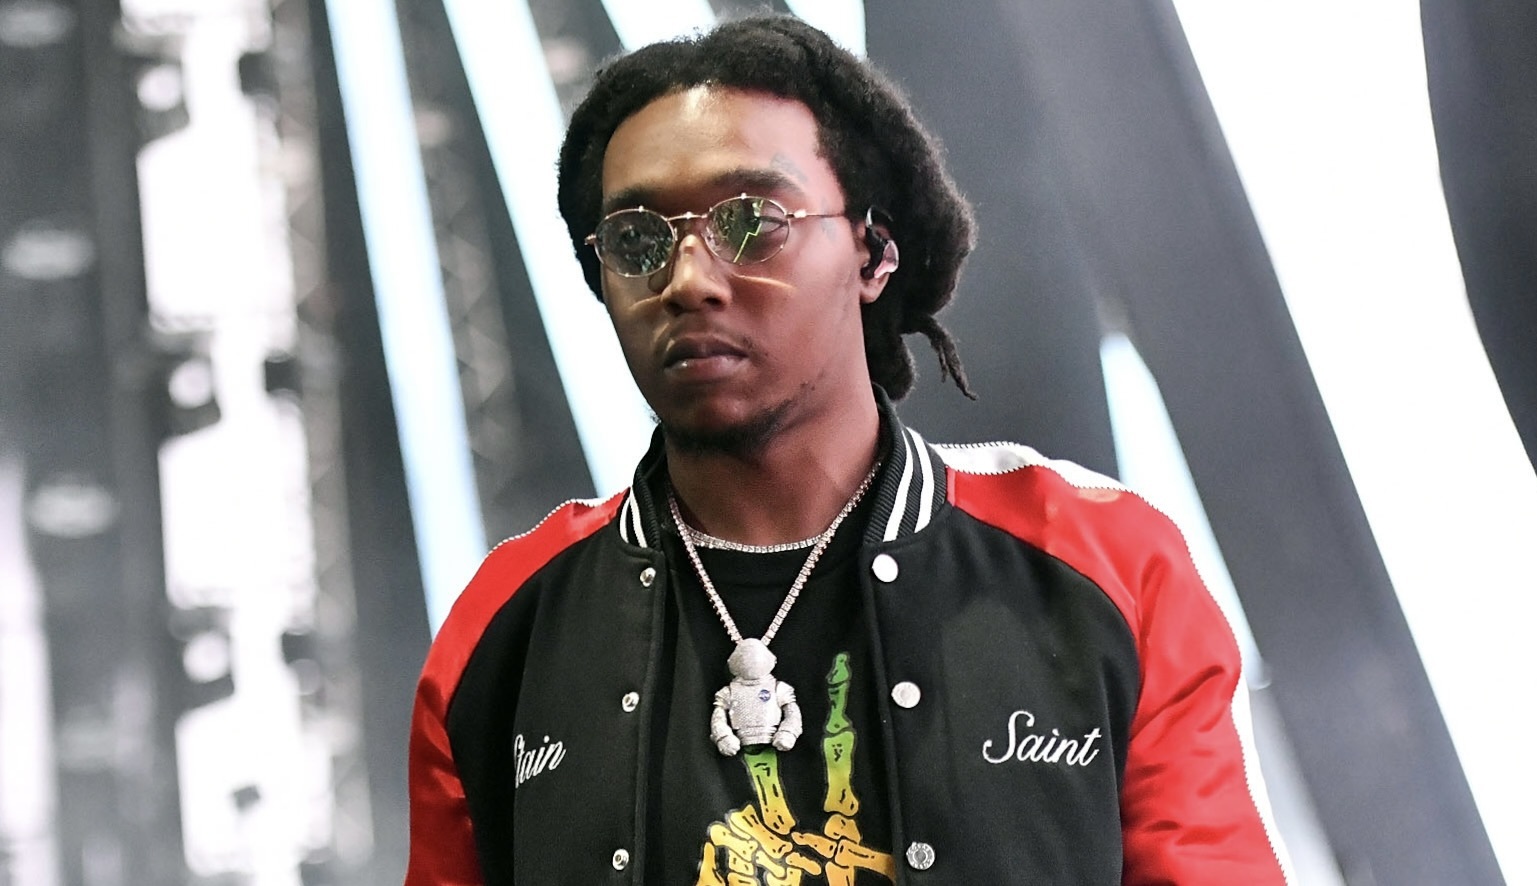 Takeoff Shooting Suspect Indicted On Murder Charge